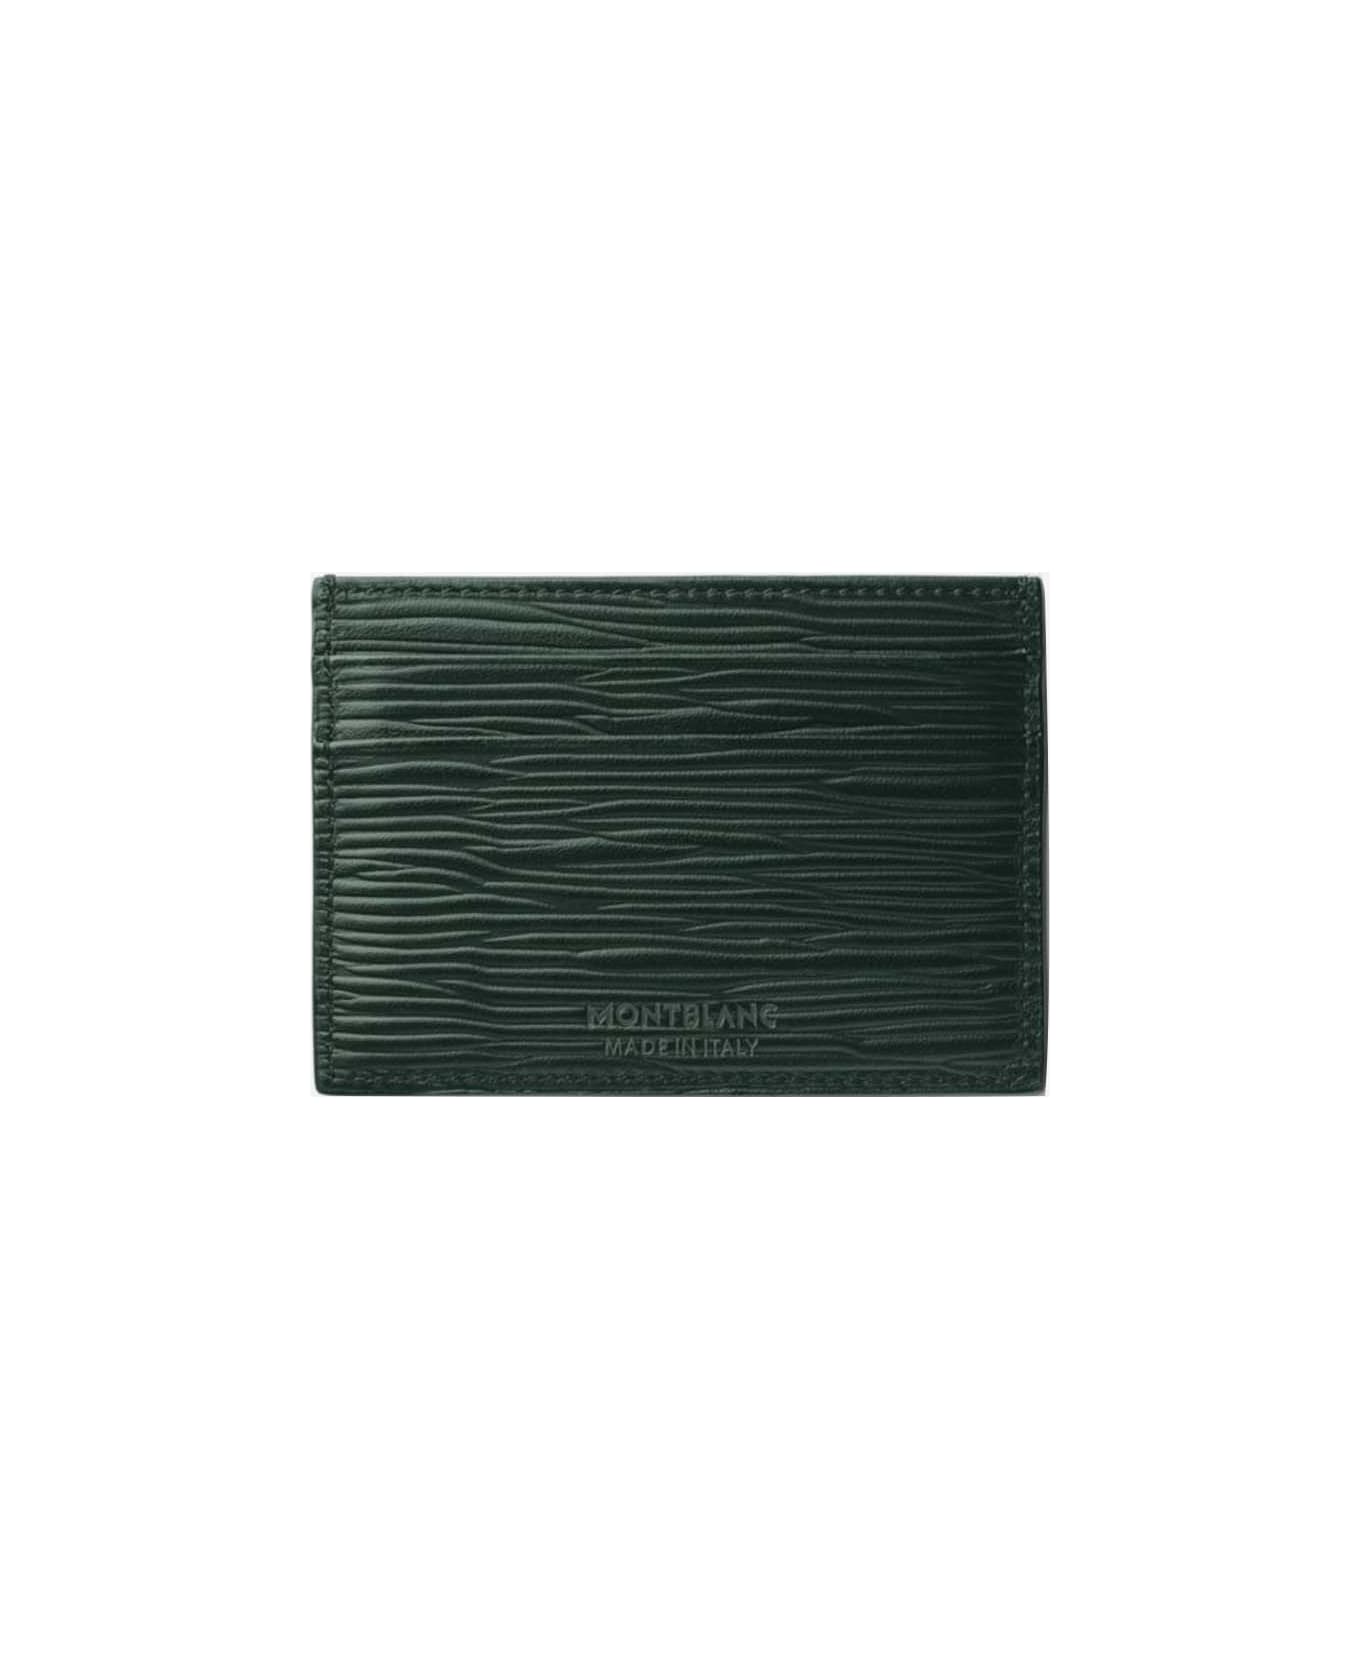 Montblanc Card Case 5 Compartments Meisterstuck - Green